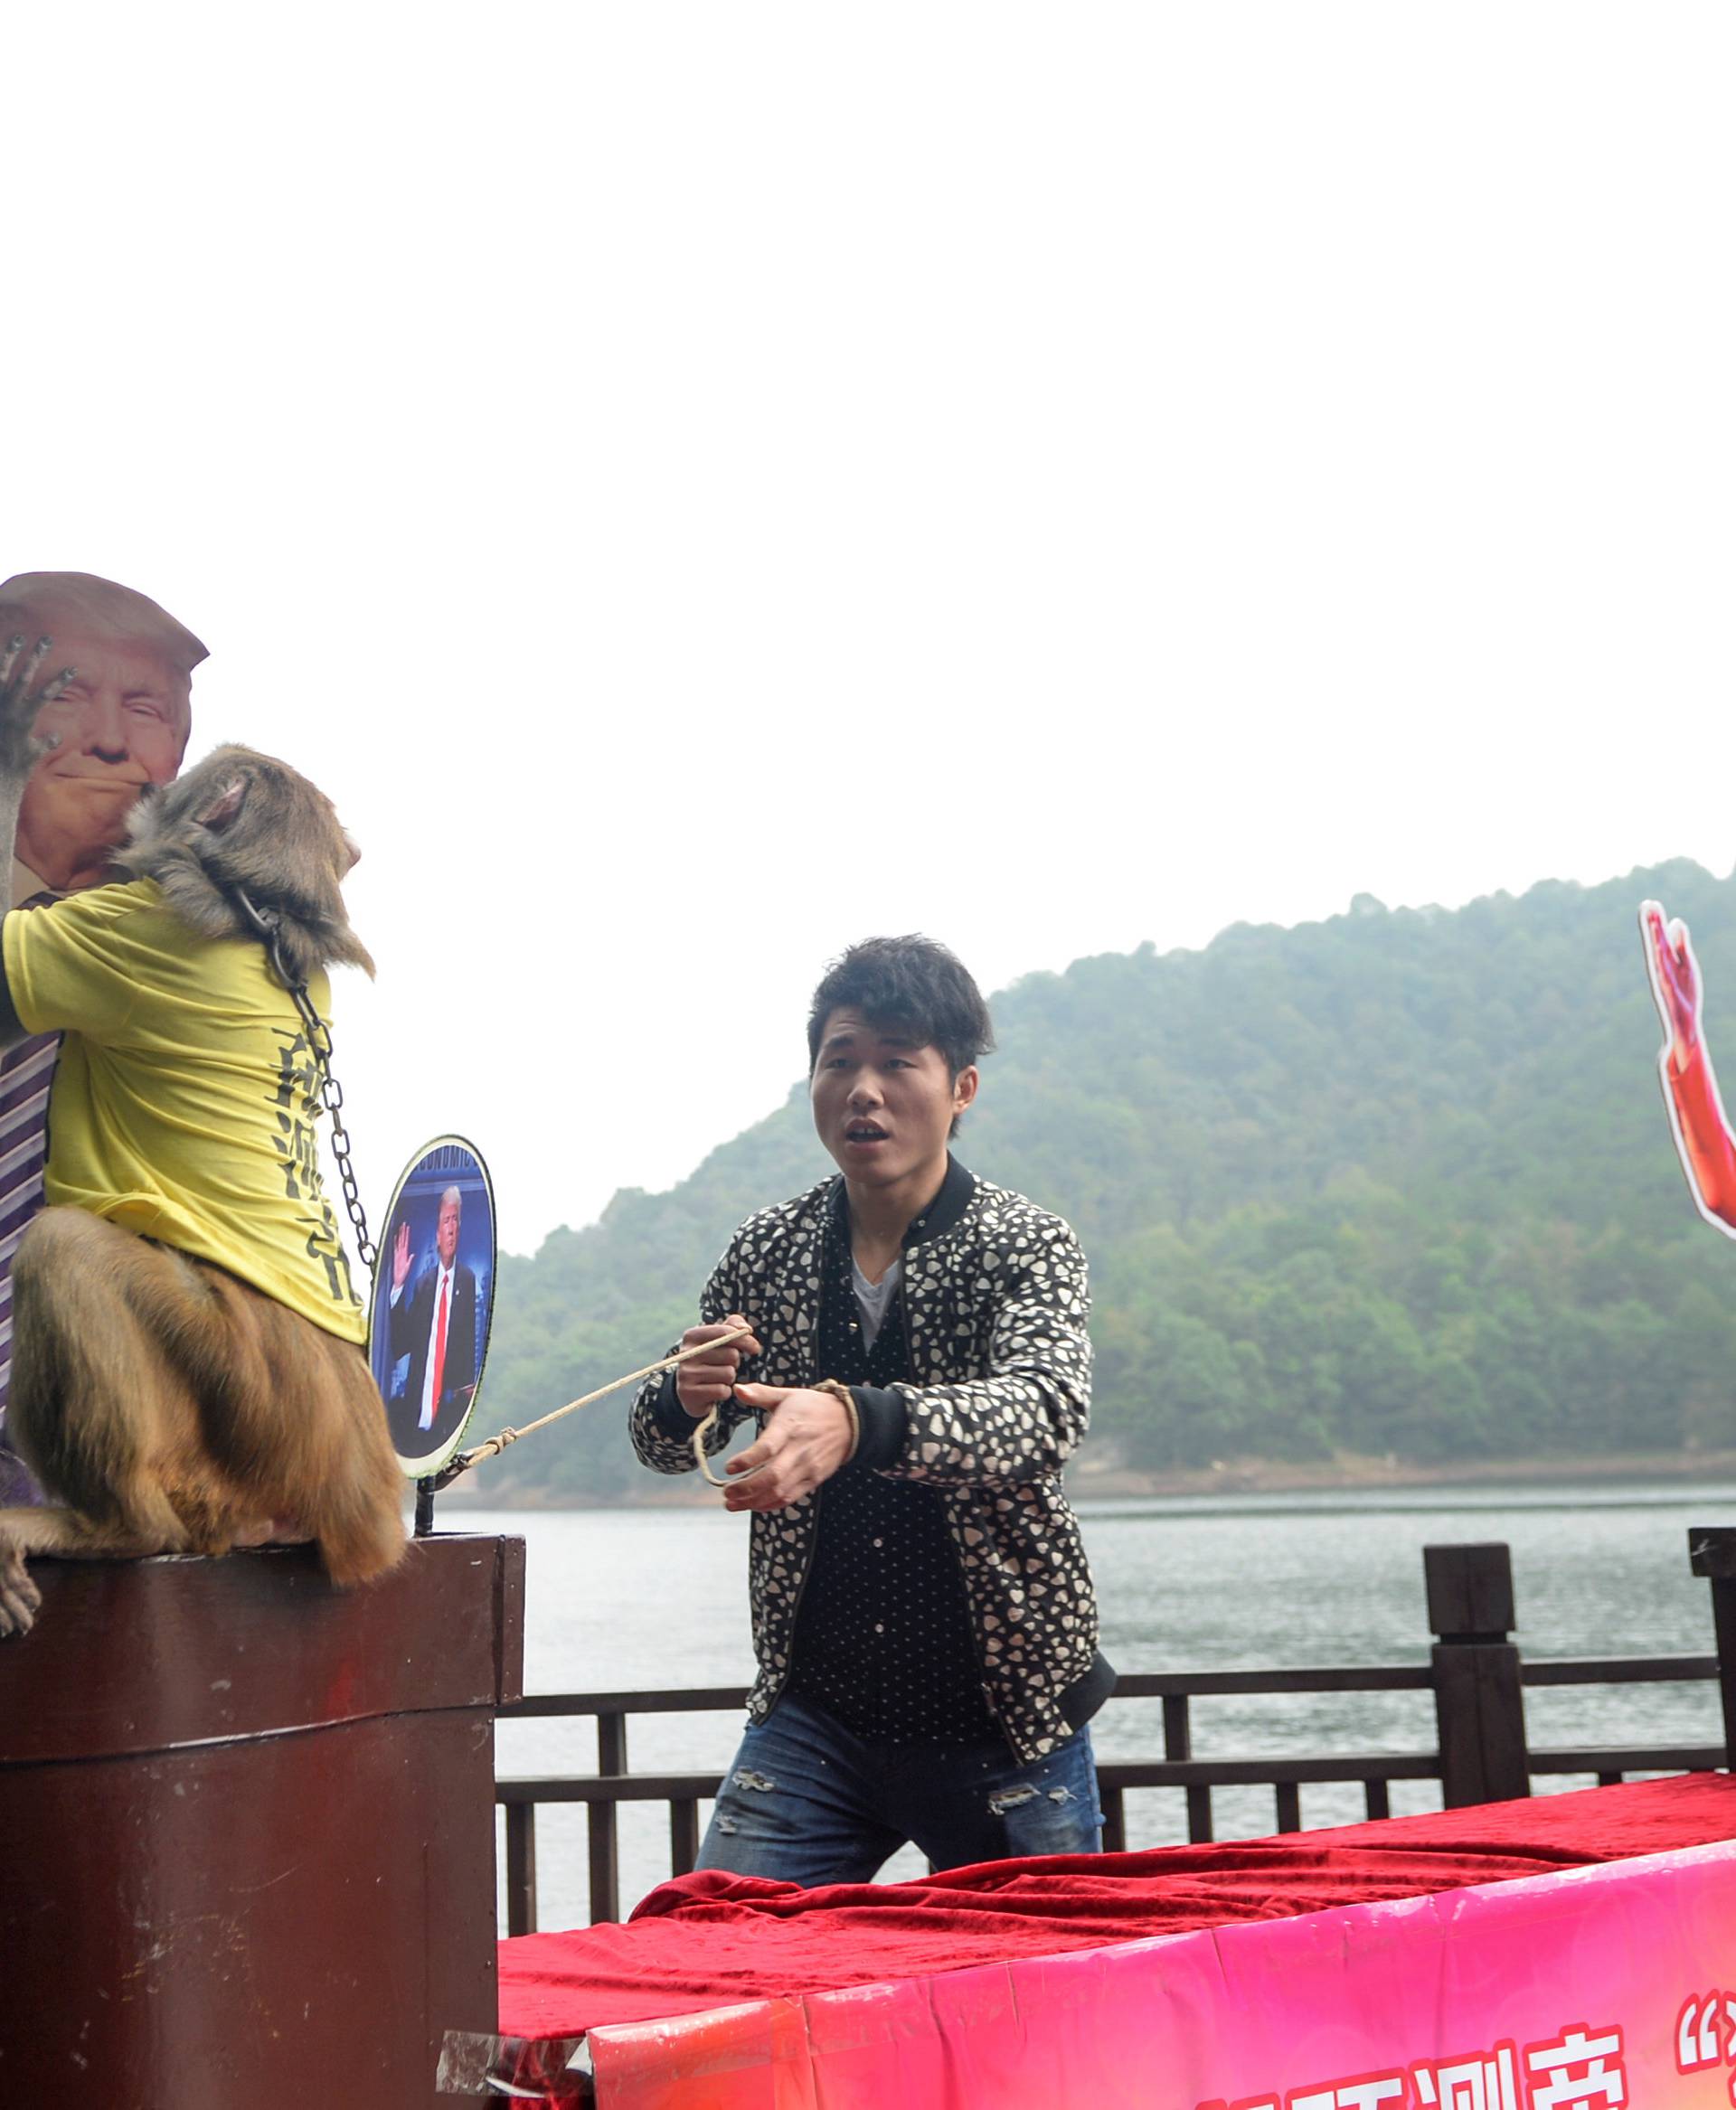 A monkey wearing a tee shirt with the characters "King of prediction" kisses a cardboard cutout of Donald Trump as it makes a choice between Hillary Clinton and Trump, in Changsha